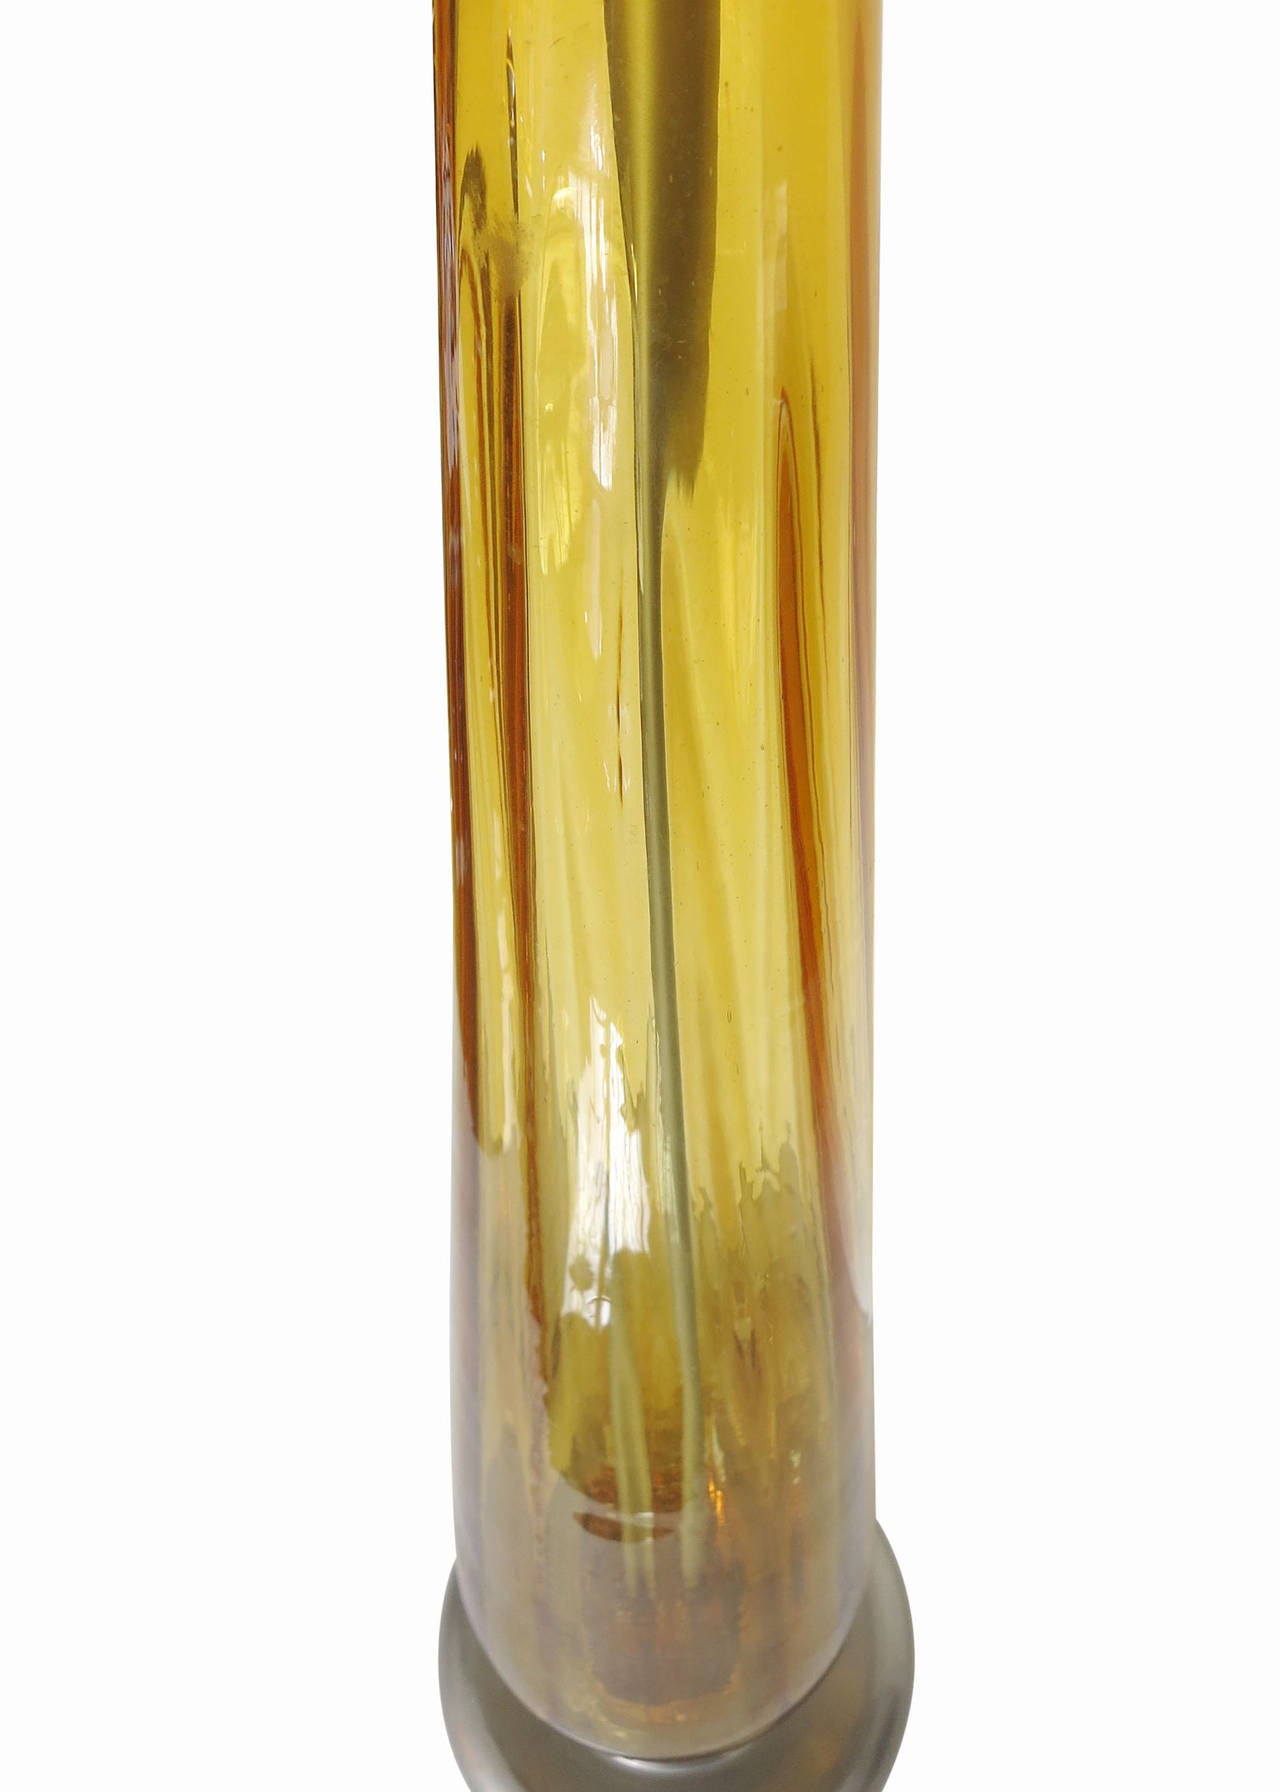 This piece is a luscious opaline yellow Murano glass lamp with aluminum collars mounted on polished aluminum bases. The lamp's design is reminiscent of the same made famous by Archimede Seguso and is sure to fit any setting.

This lamp is 30.5